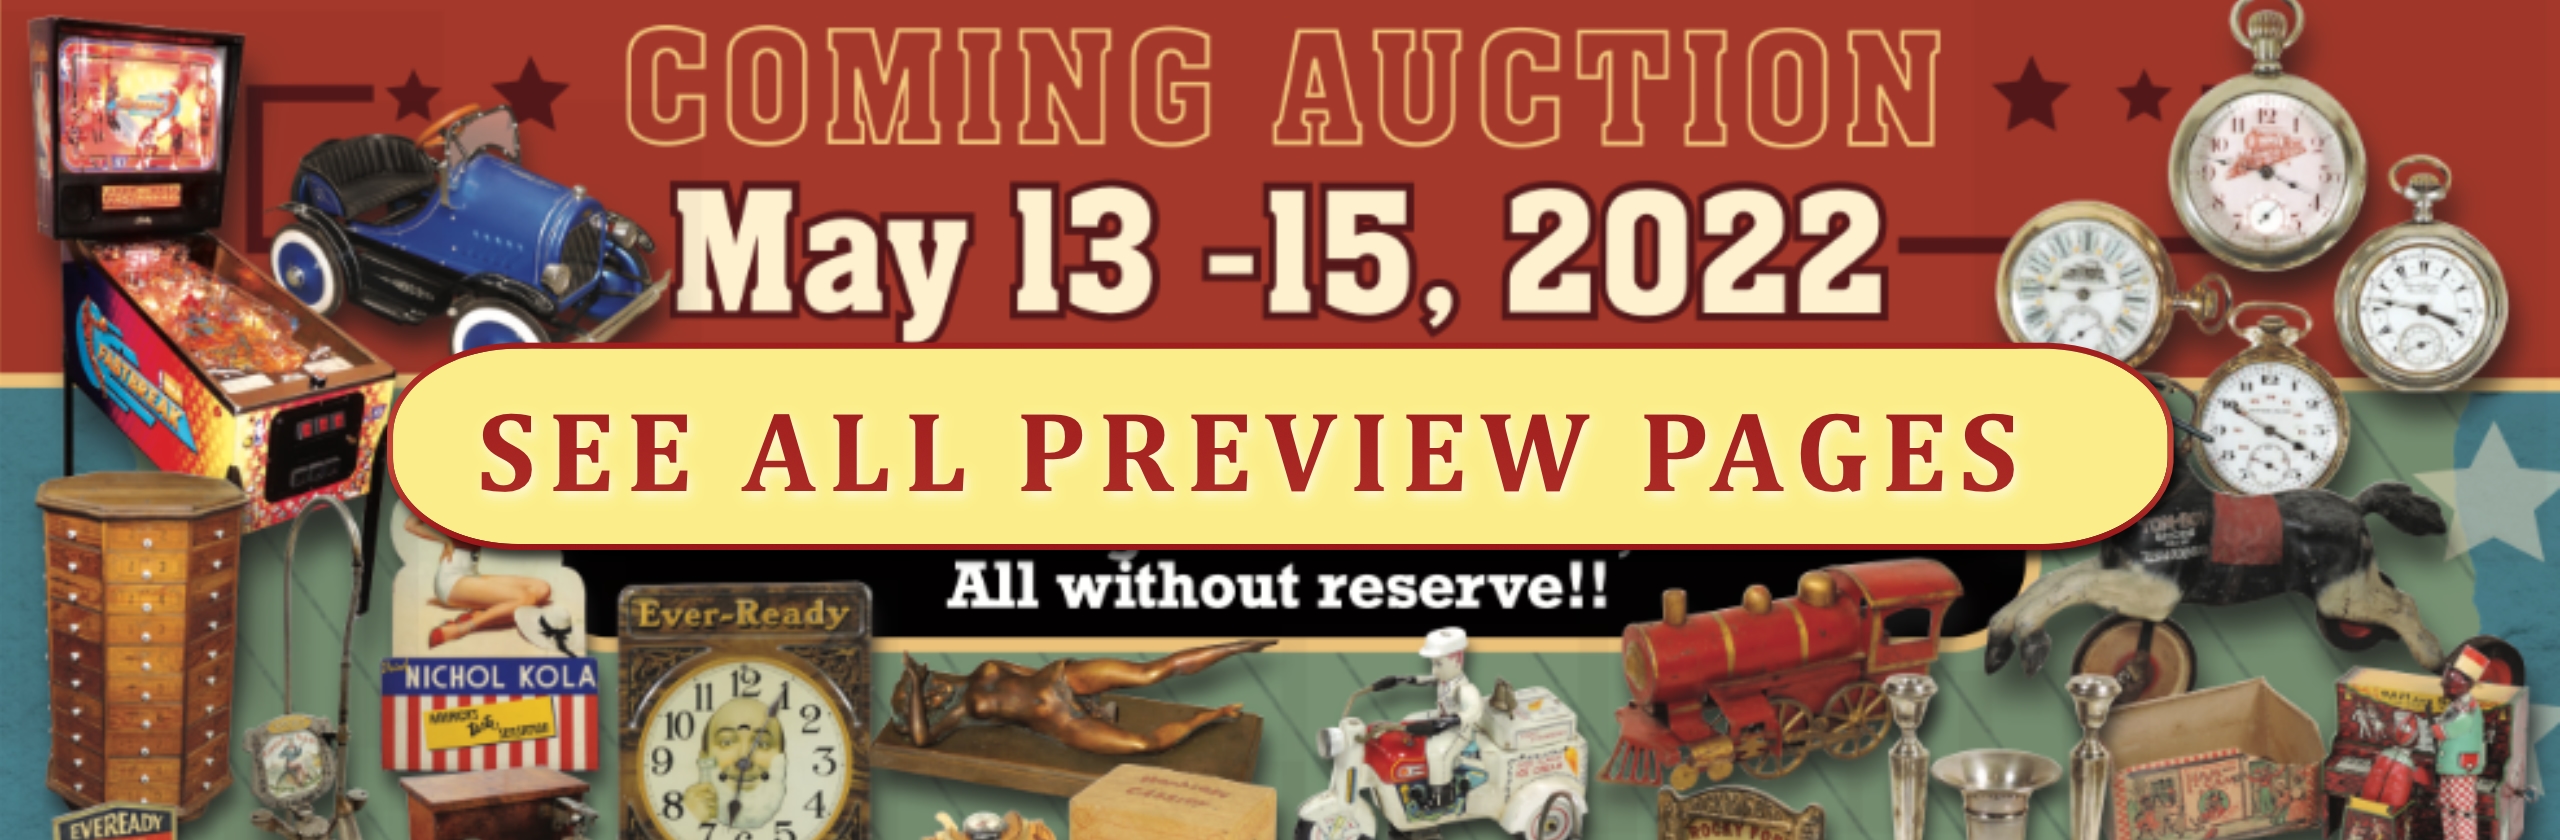 May 22' Auction Preview